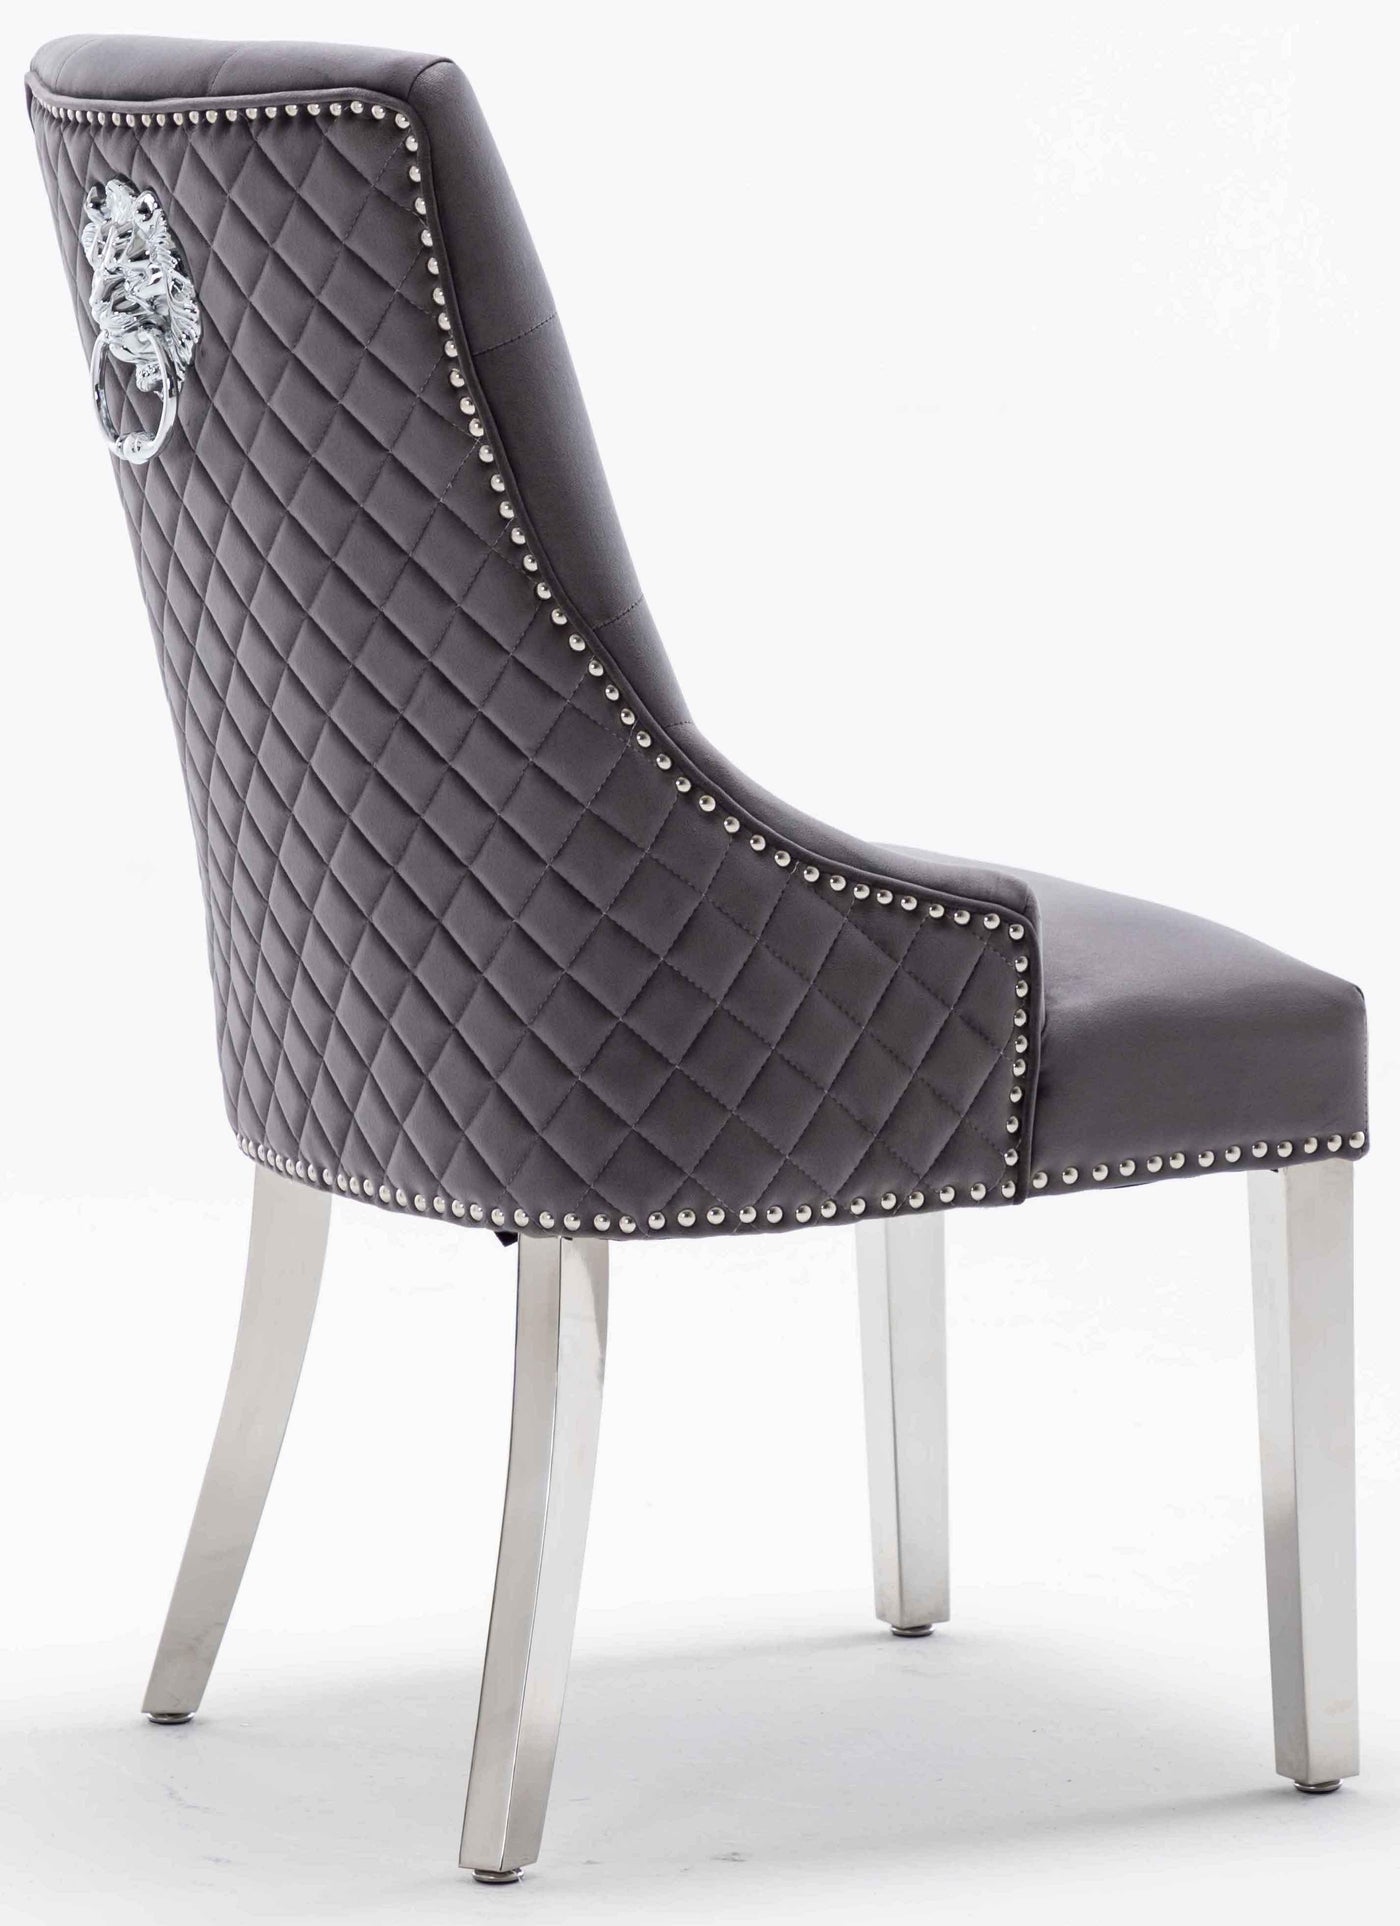 Louis 200cm Grey Marble Dining Table + 4 Grey Lion Knocker Quilted Back Chairs + 130cm Bench-Esme Furnishings